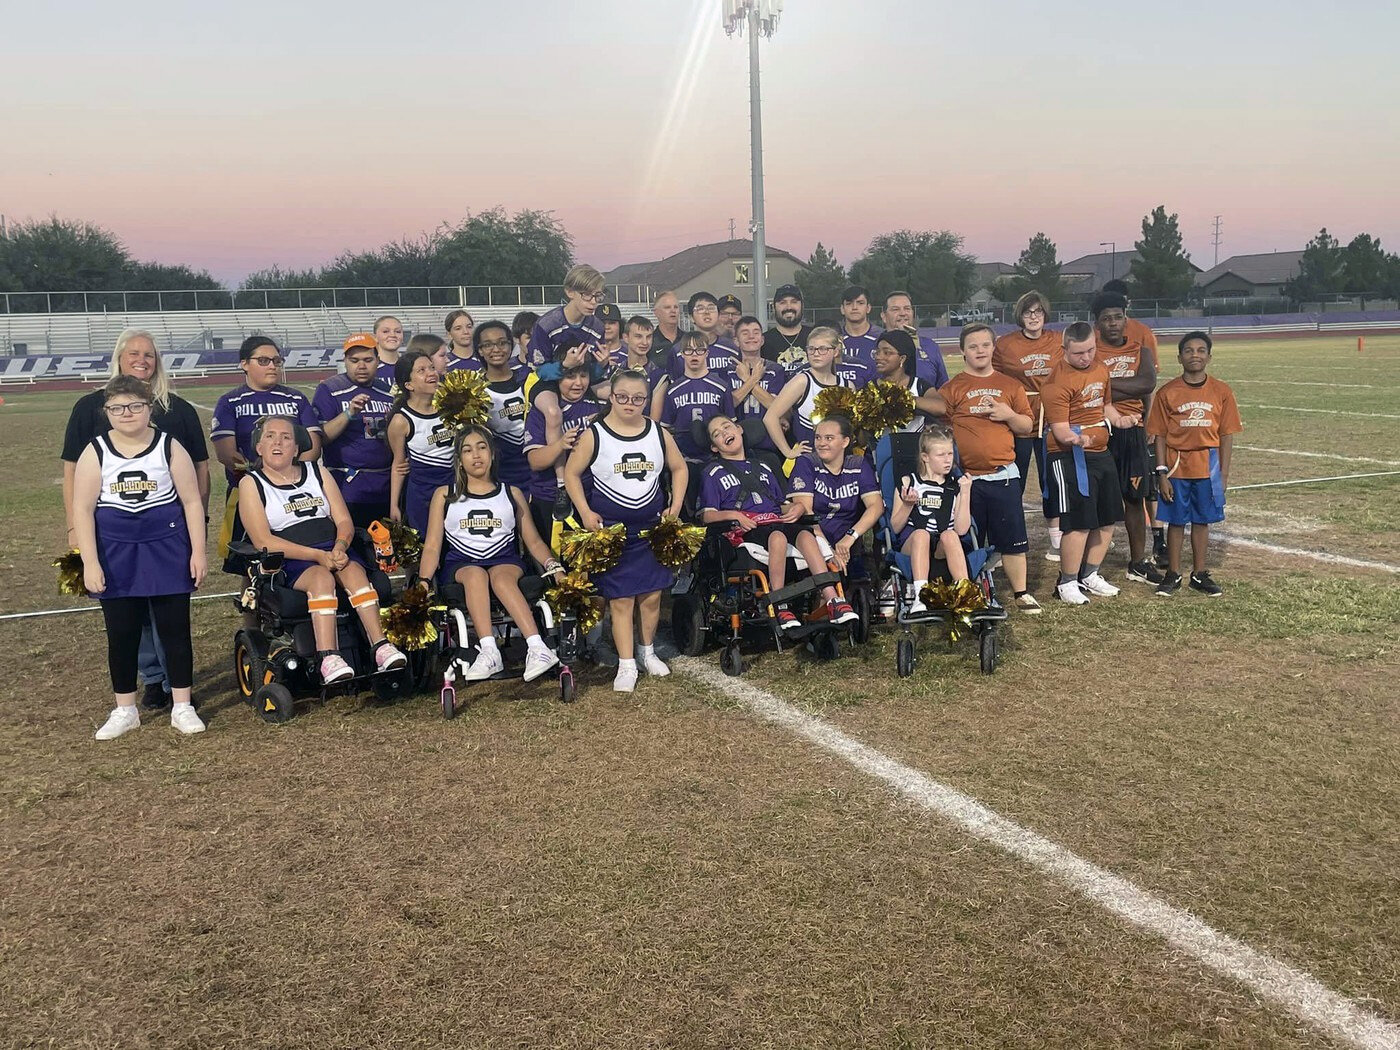 In Unified Sports, students with and without disabilities join forces to compete in various sports.